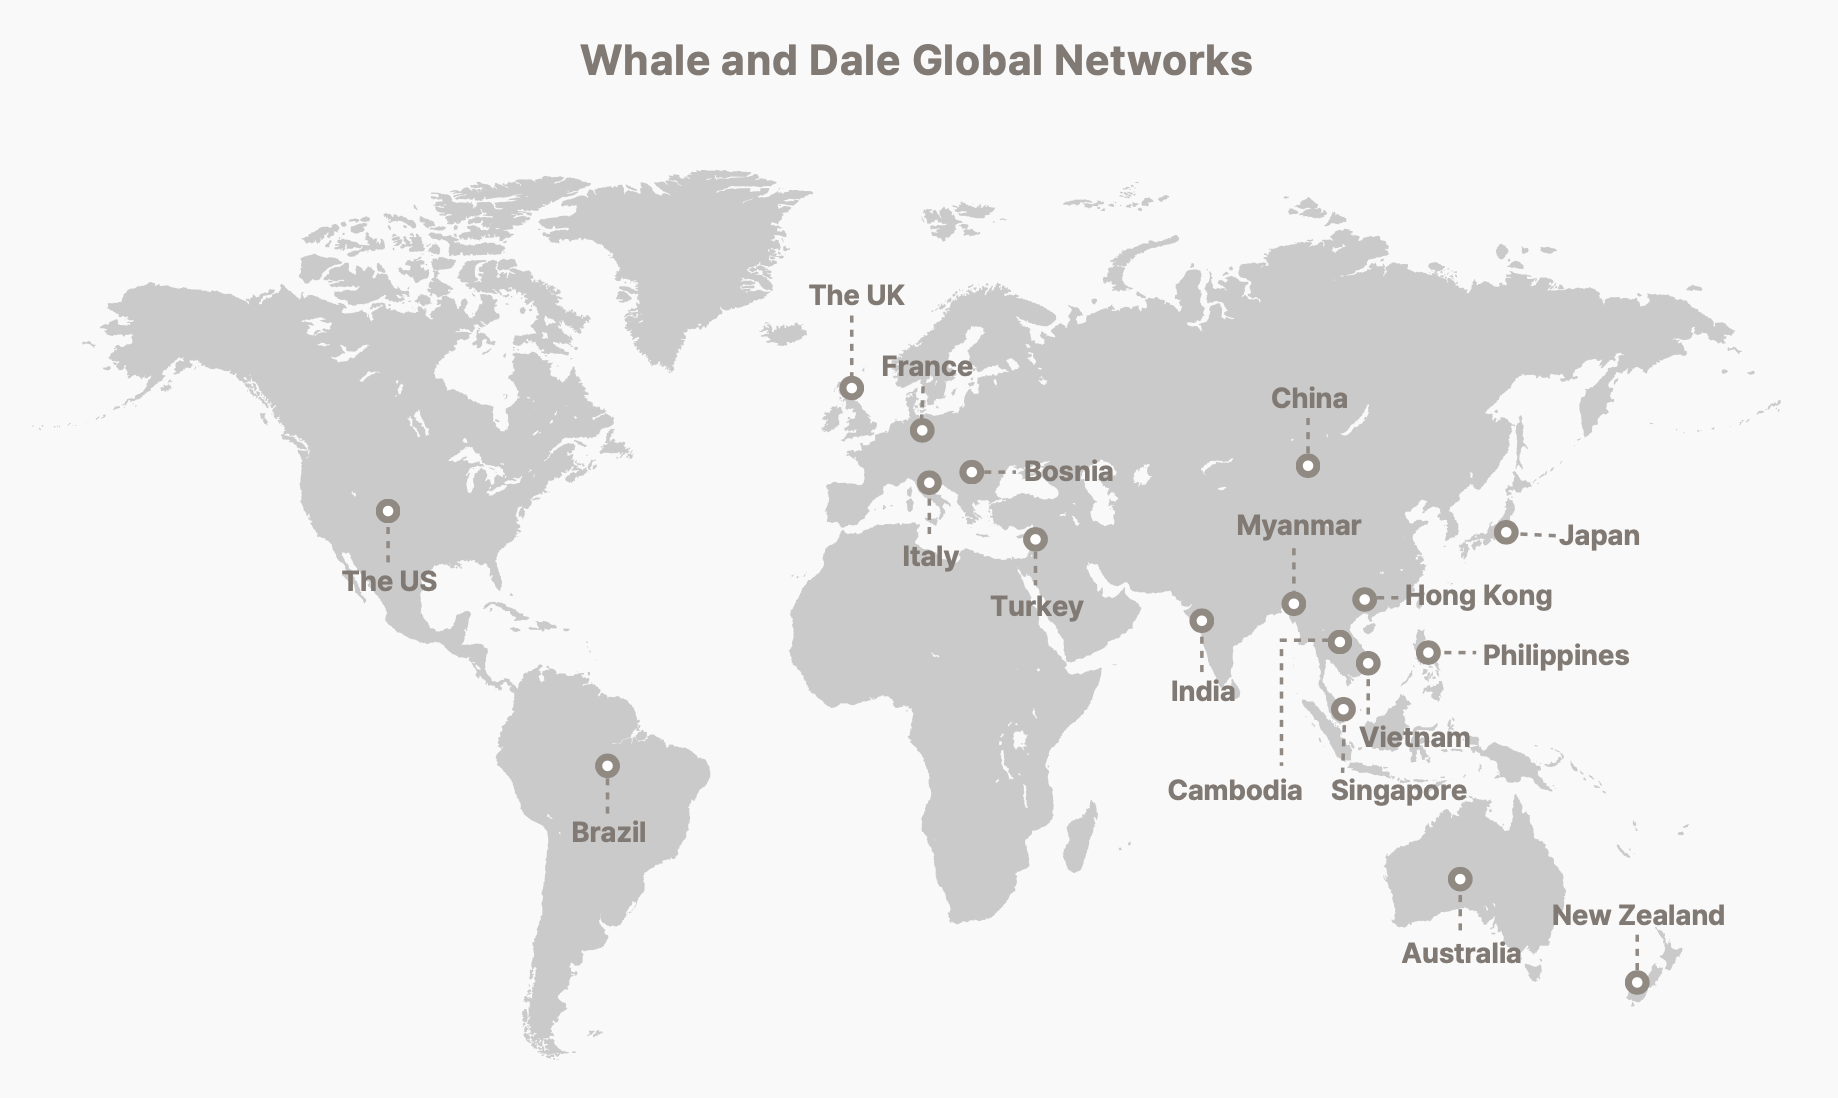 Whald and Dale Global Networks